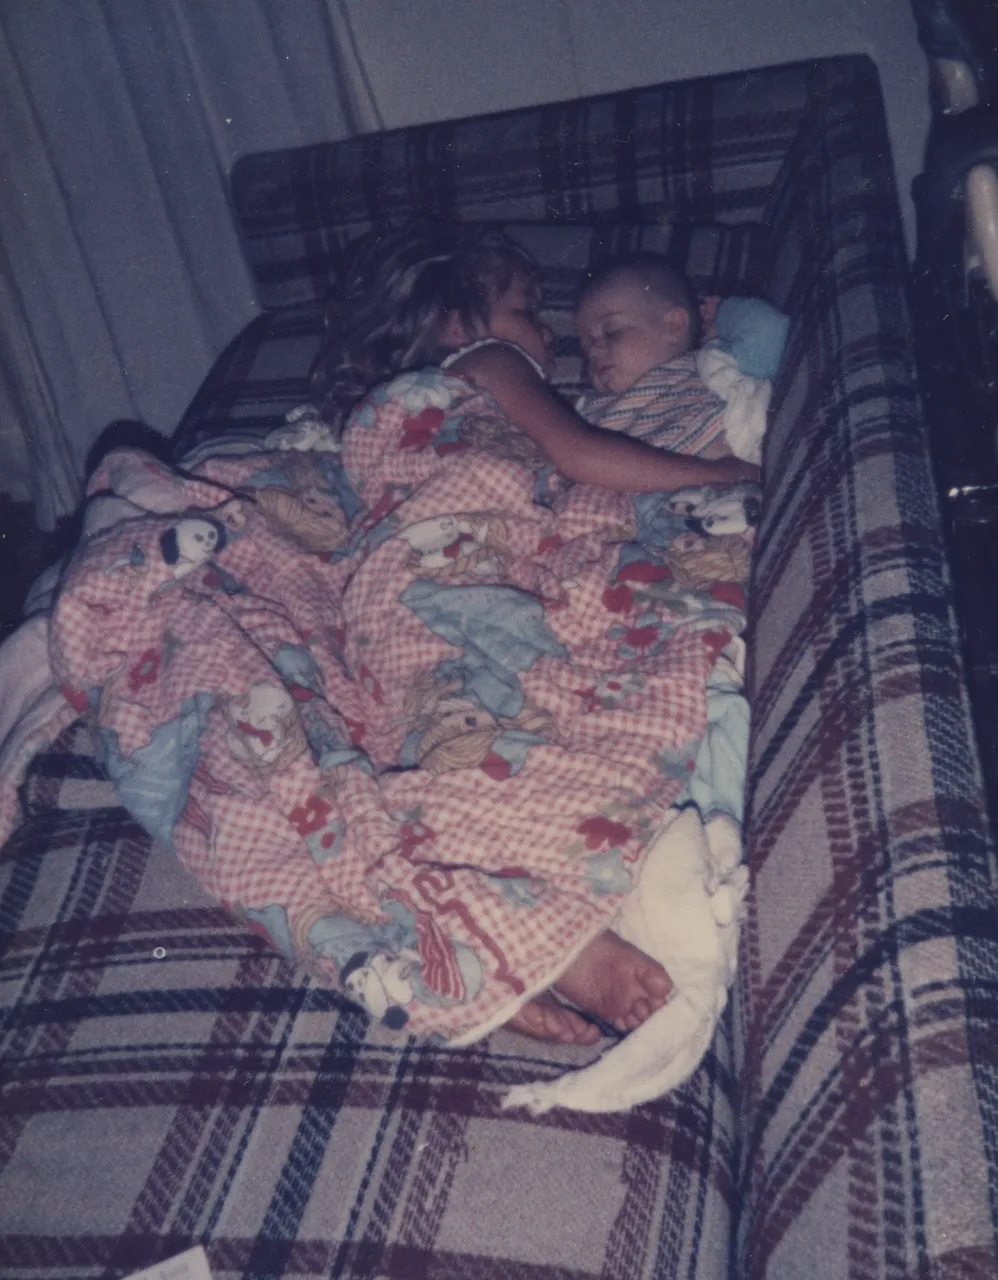 1985 Joey Arnold & Katie 05 Sleeping Couch Together.png